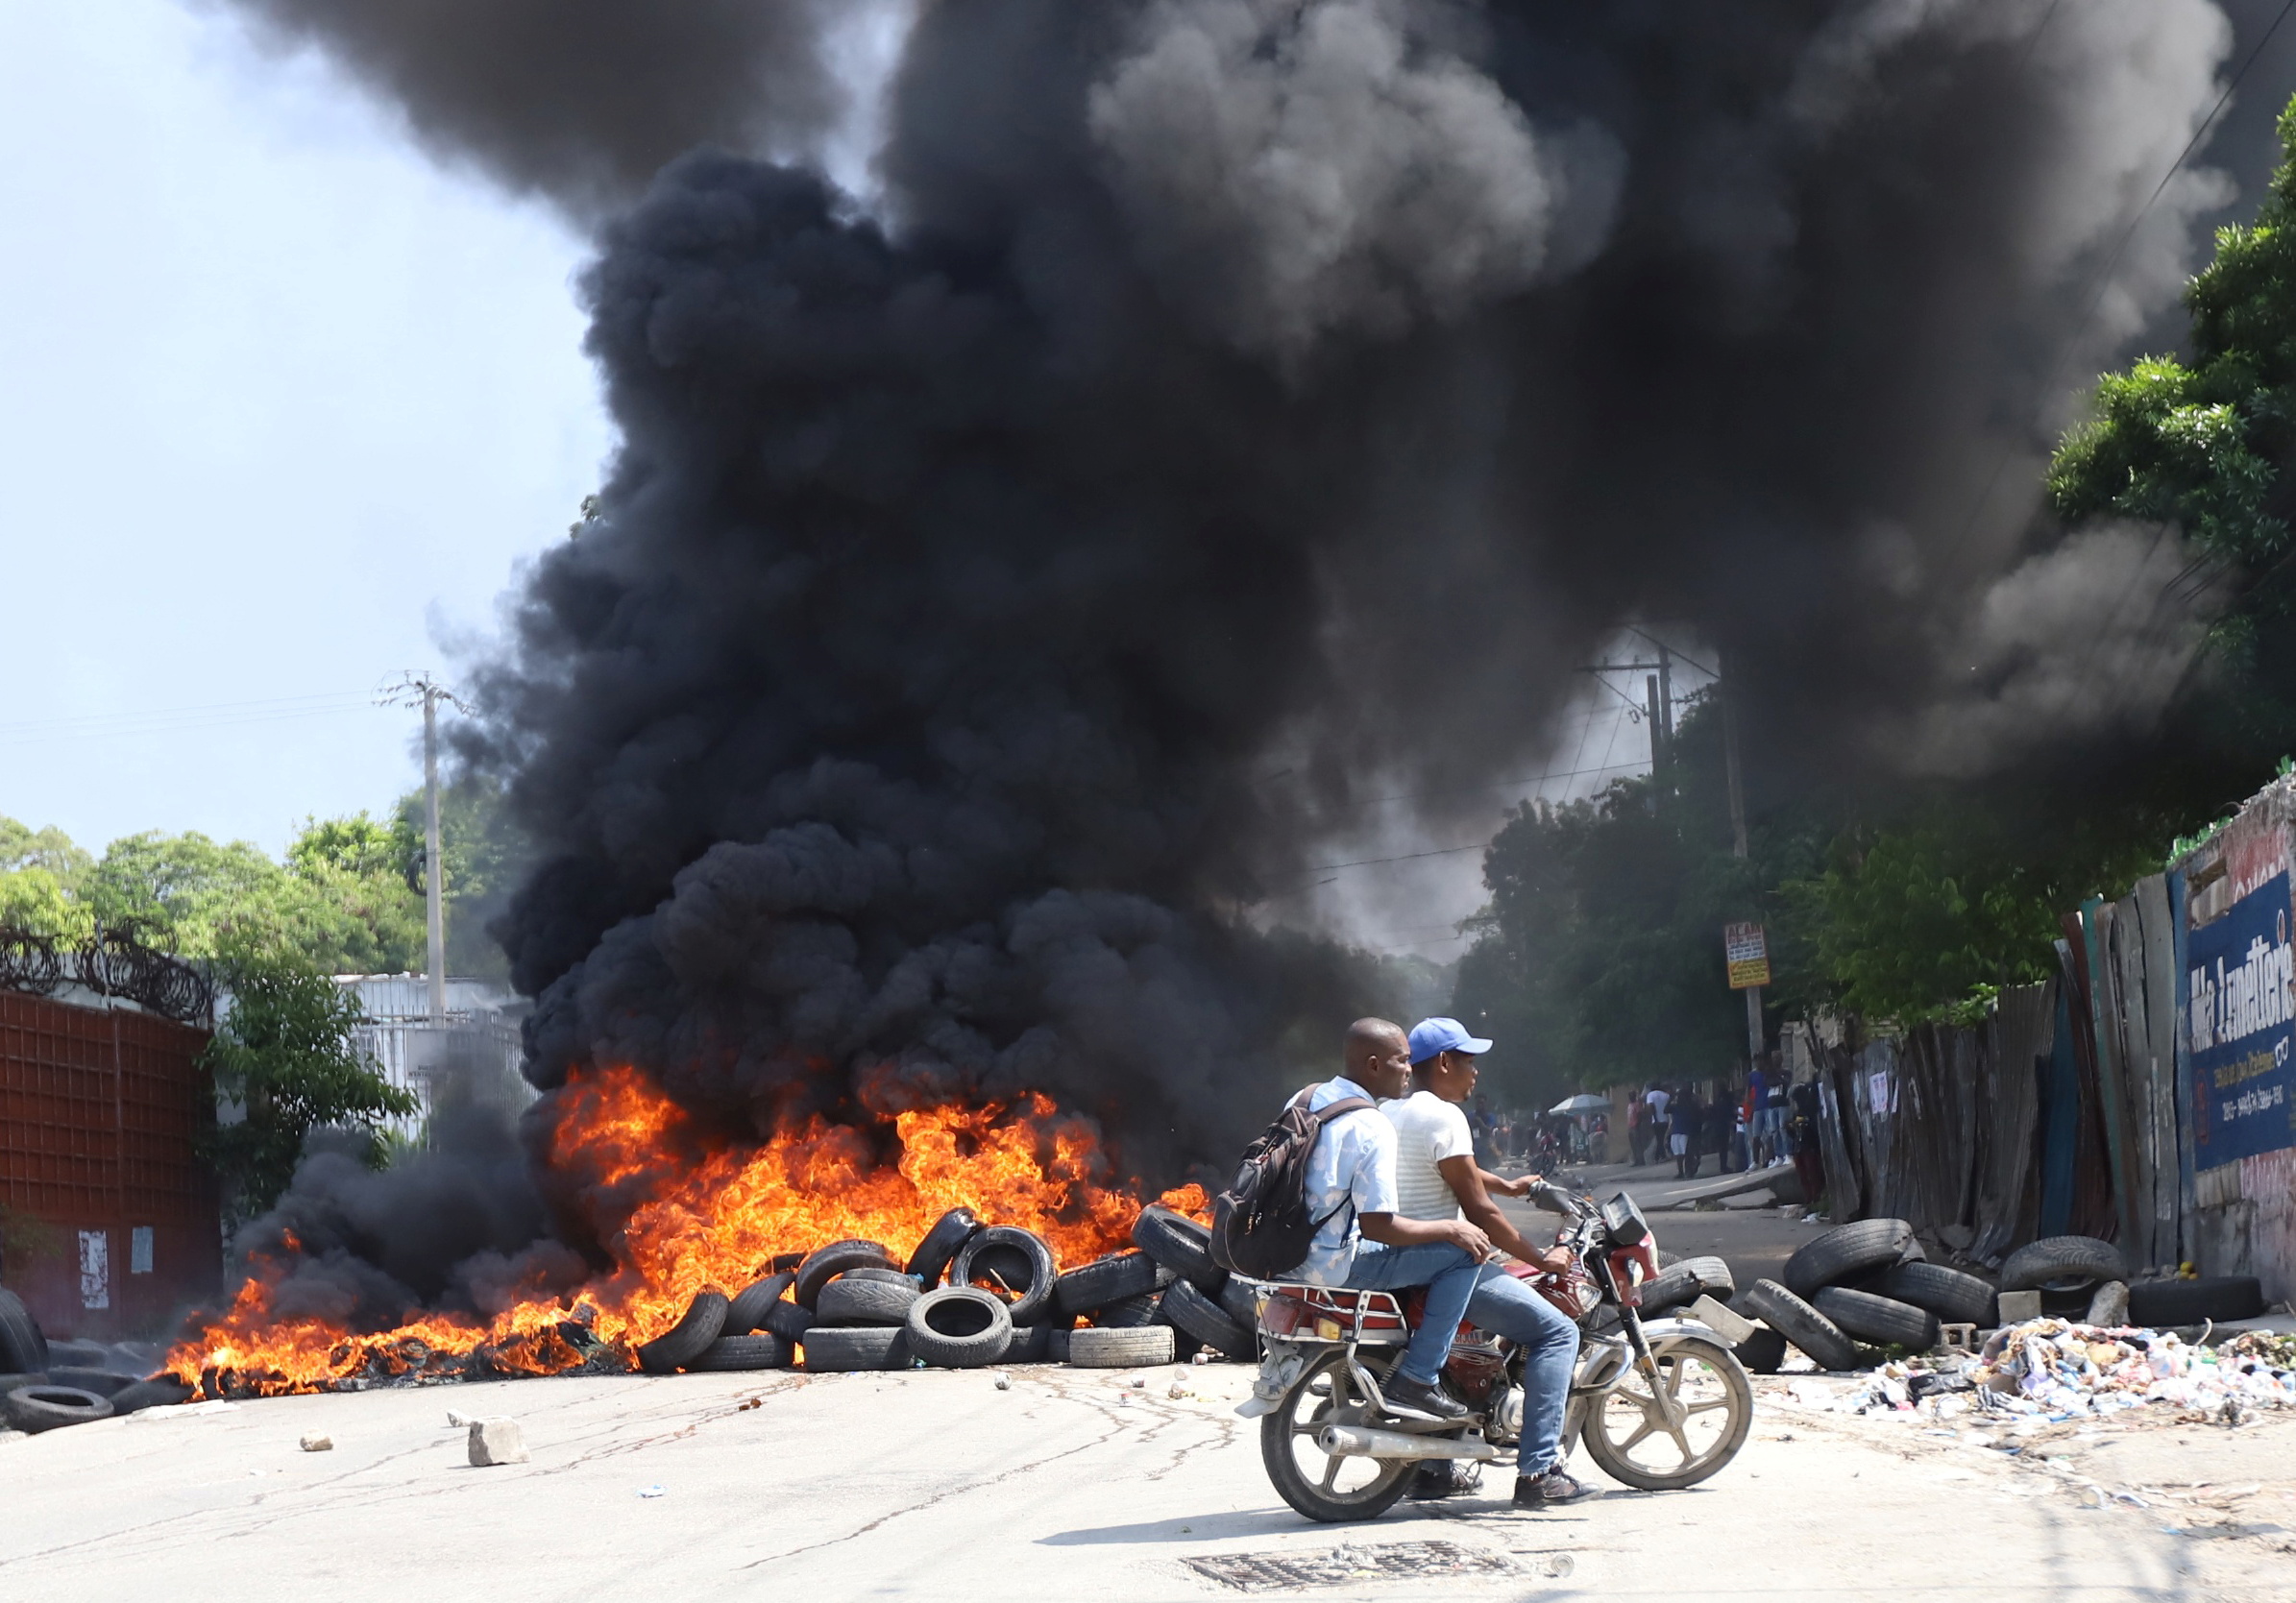 Haitians strike to protest kidnappings as pressure grows to free missionaries